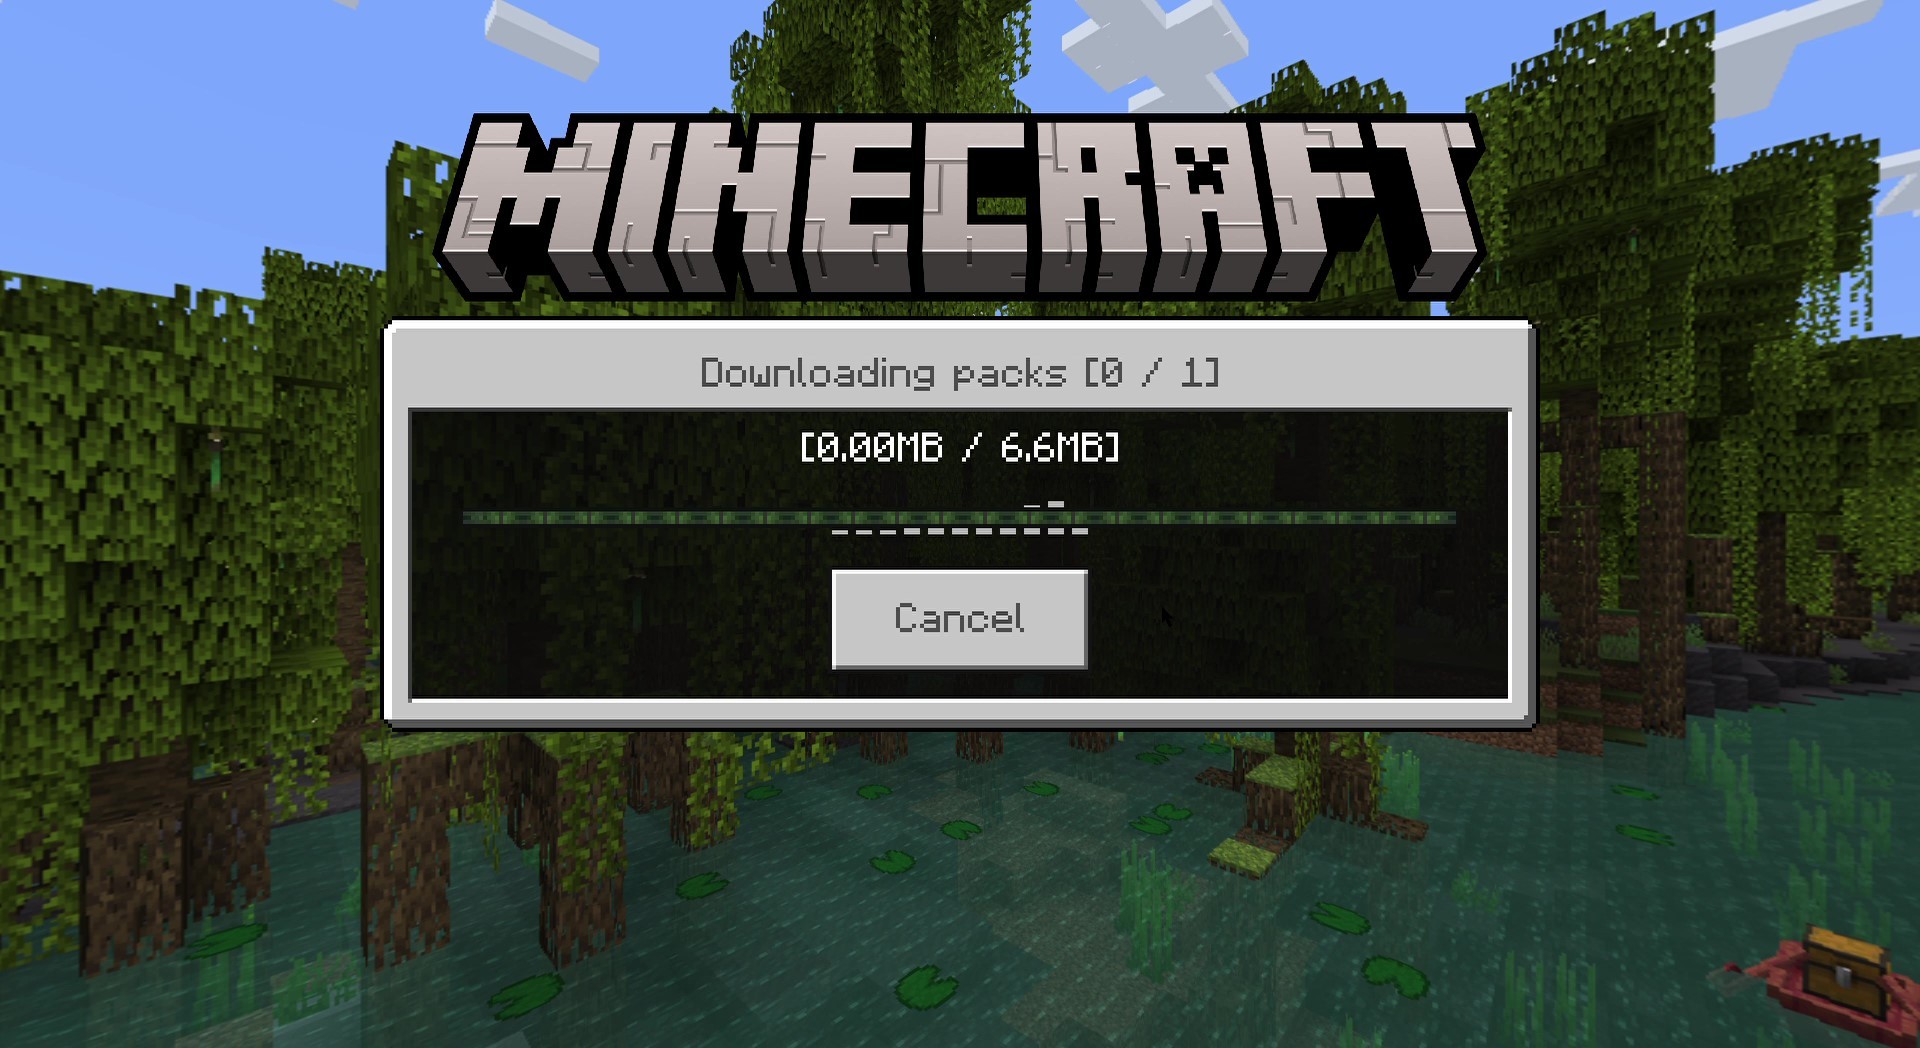 Can't play multiplayer after account migration - Java Edition Support -  Support - Minecraft Forum - Minecraft Forum